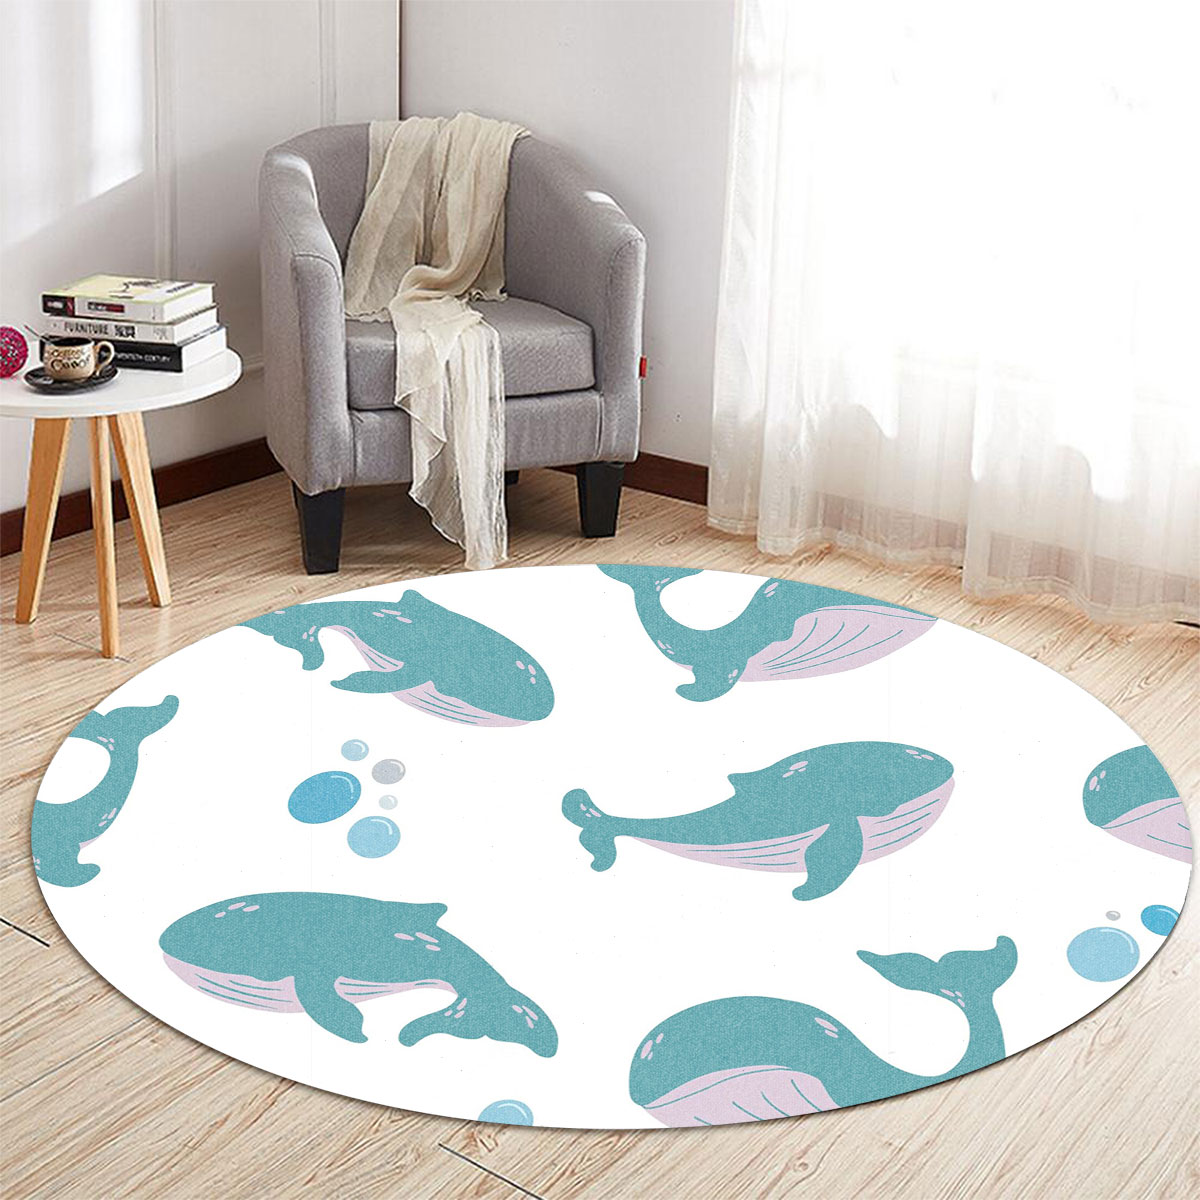 Lovely Blue Whale Round Carpet